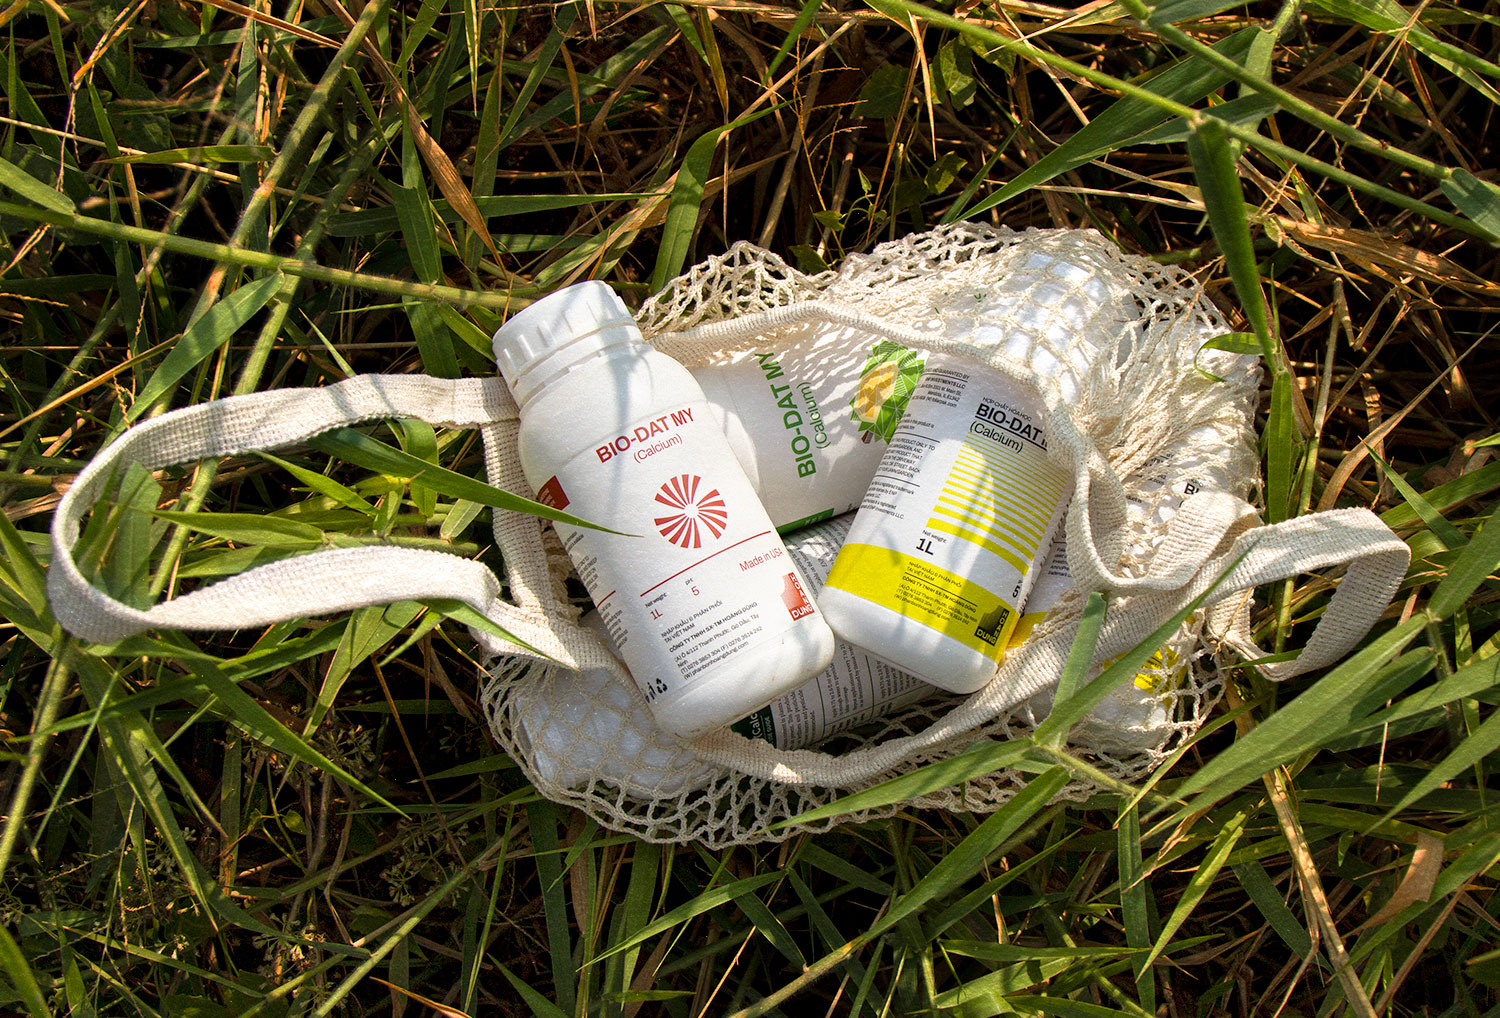 a bag of Hoang Dung bottles laying on grass